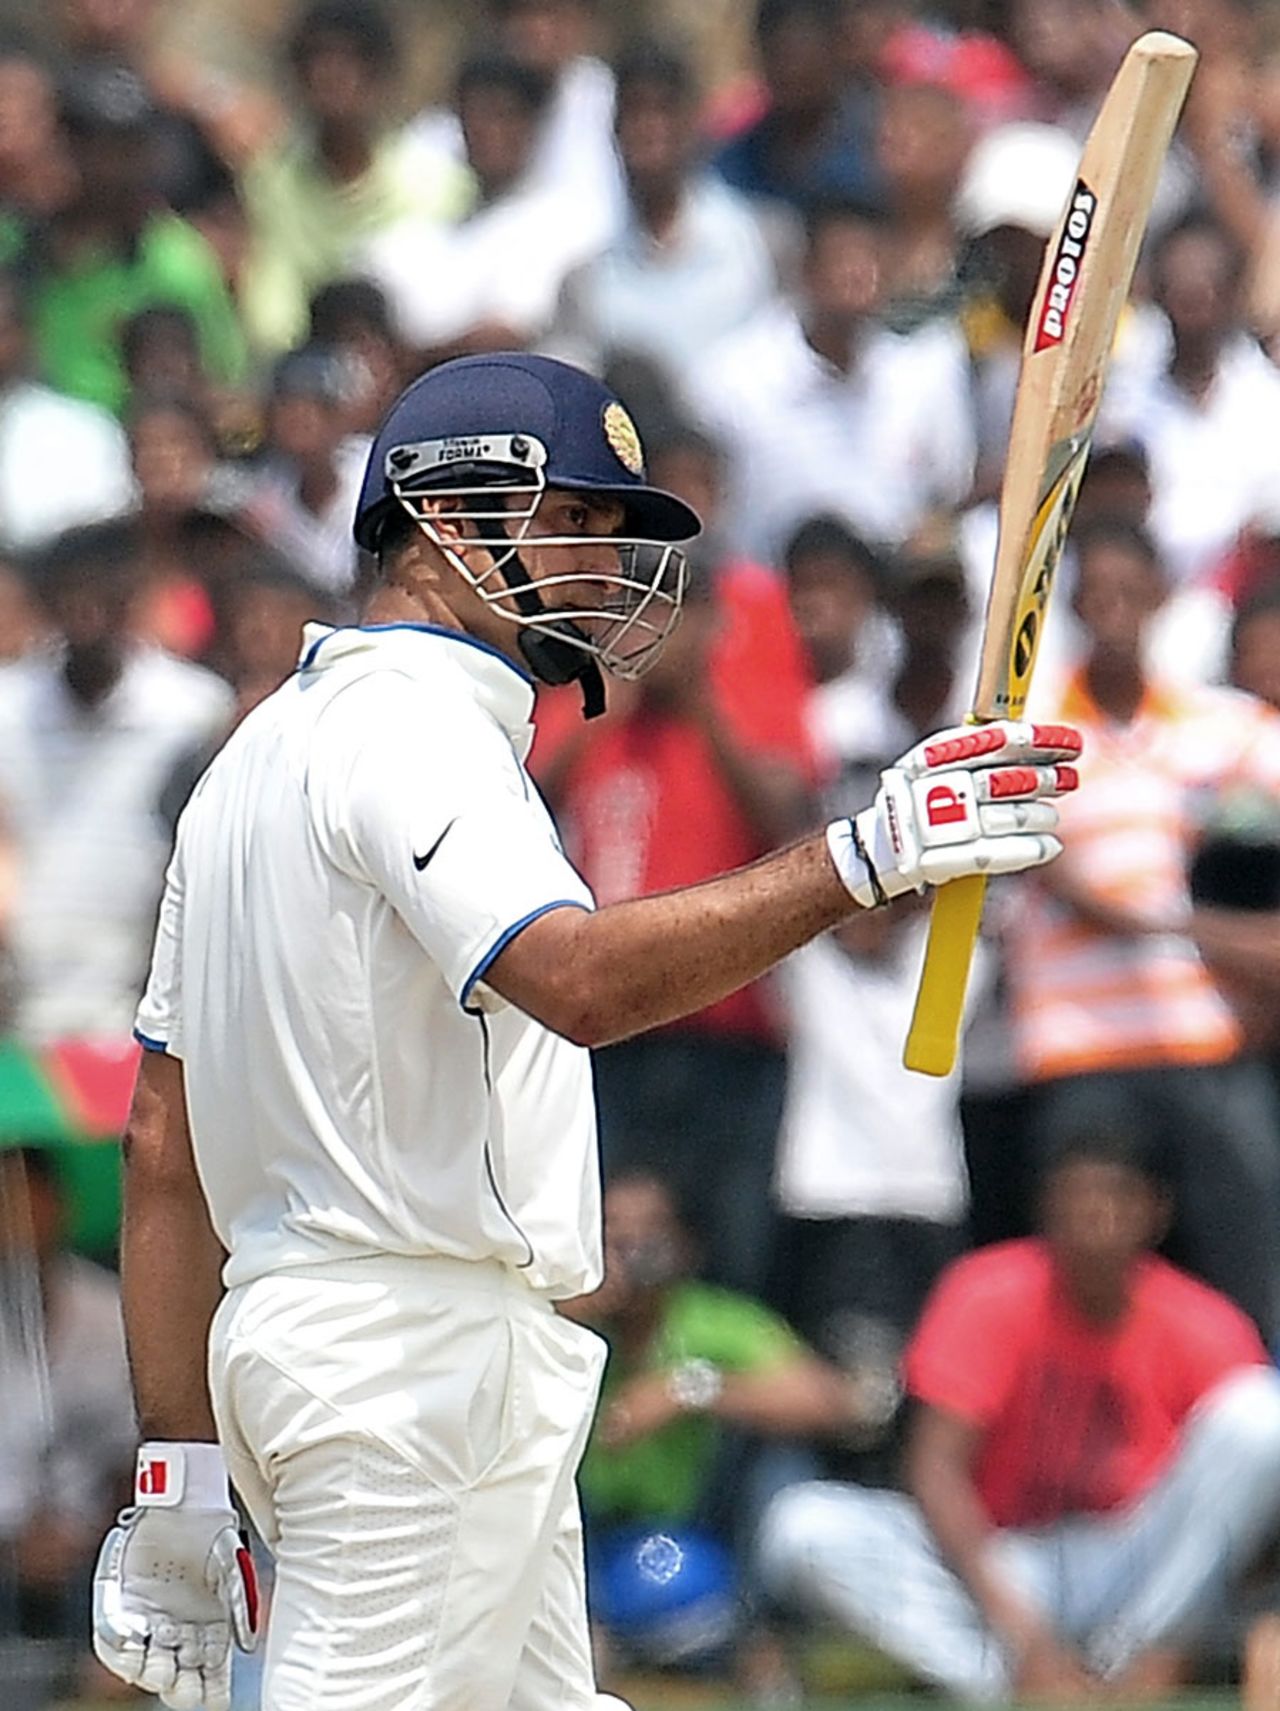 VVS Laxman raises his bat after reaching a fighting fifty, Sri Lanka v India, 1st Test, Galle, 5th day, July 22, 2010